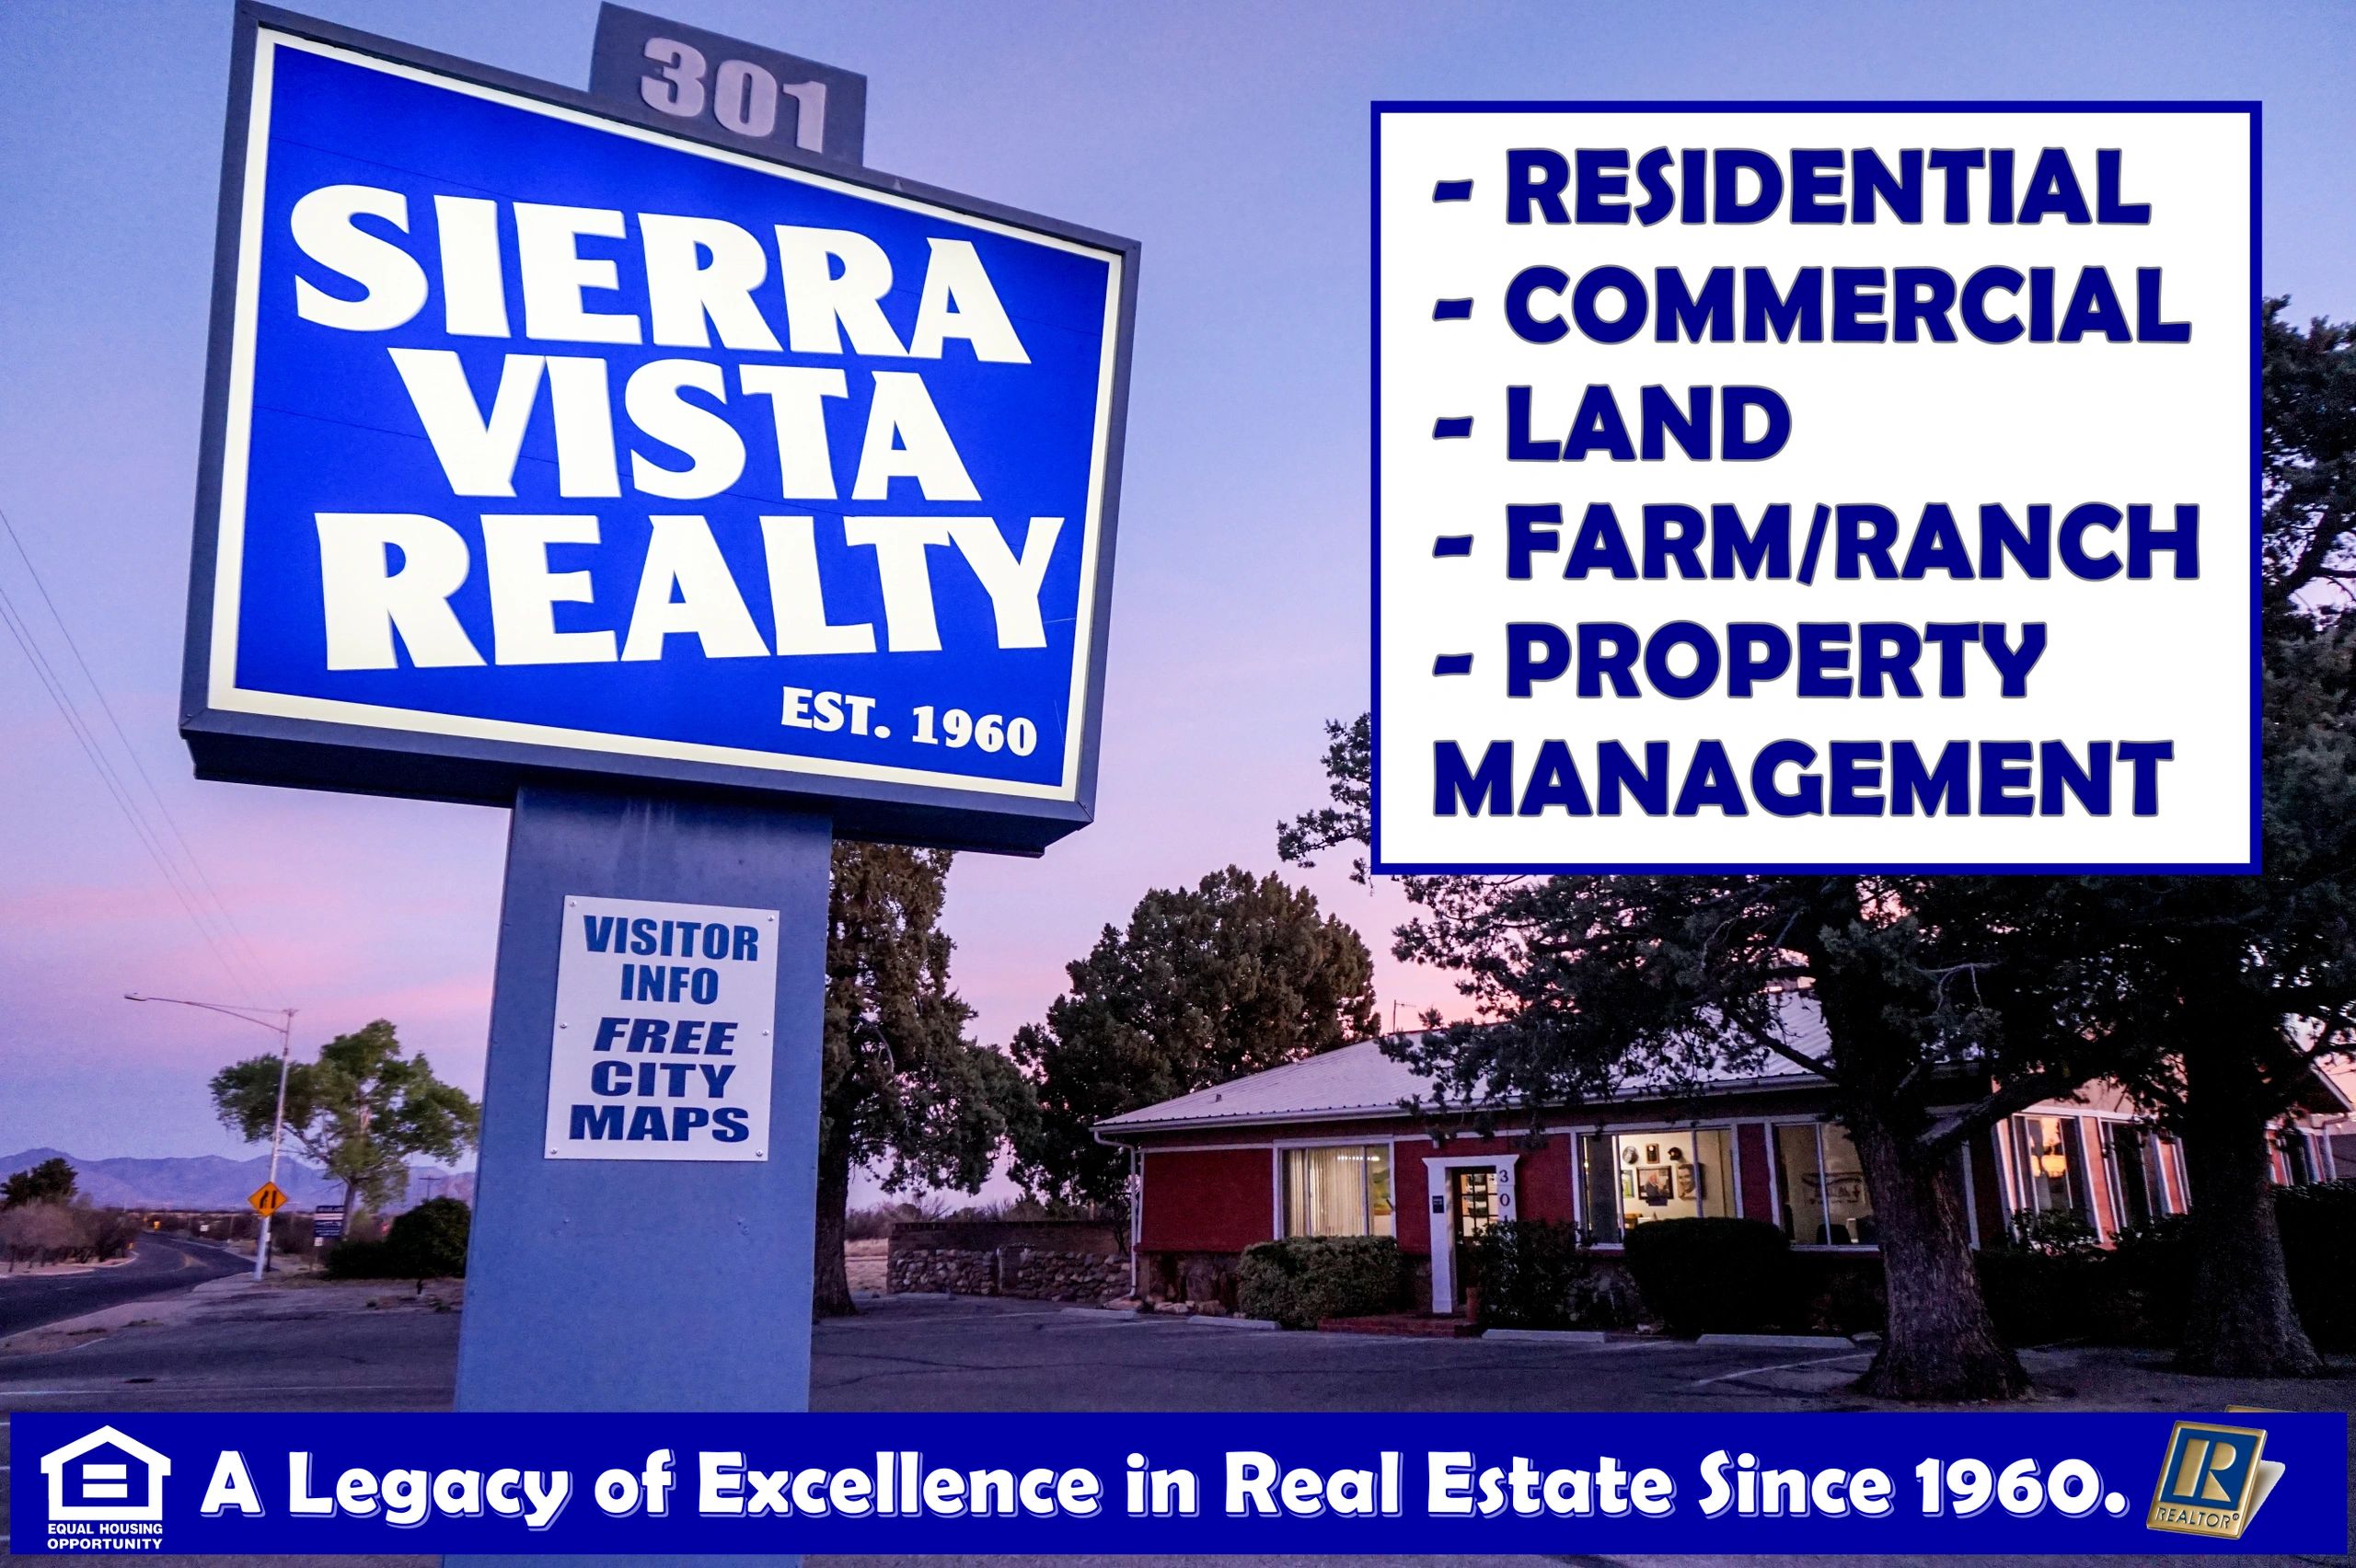 Sierra Vista Realty helping with Residential, commercial, land, farm & ranch and property management